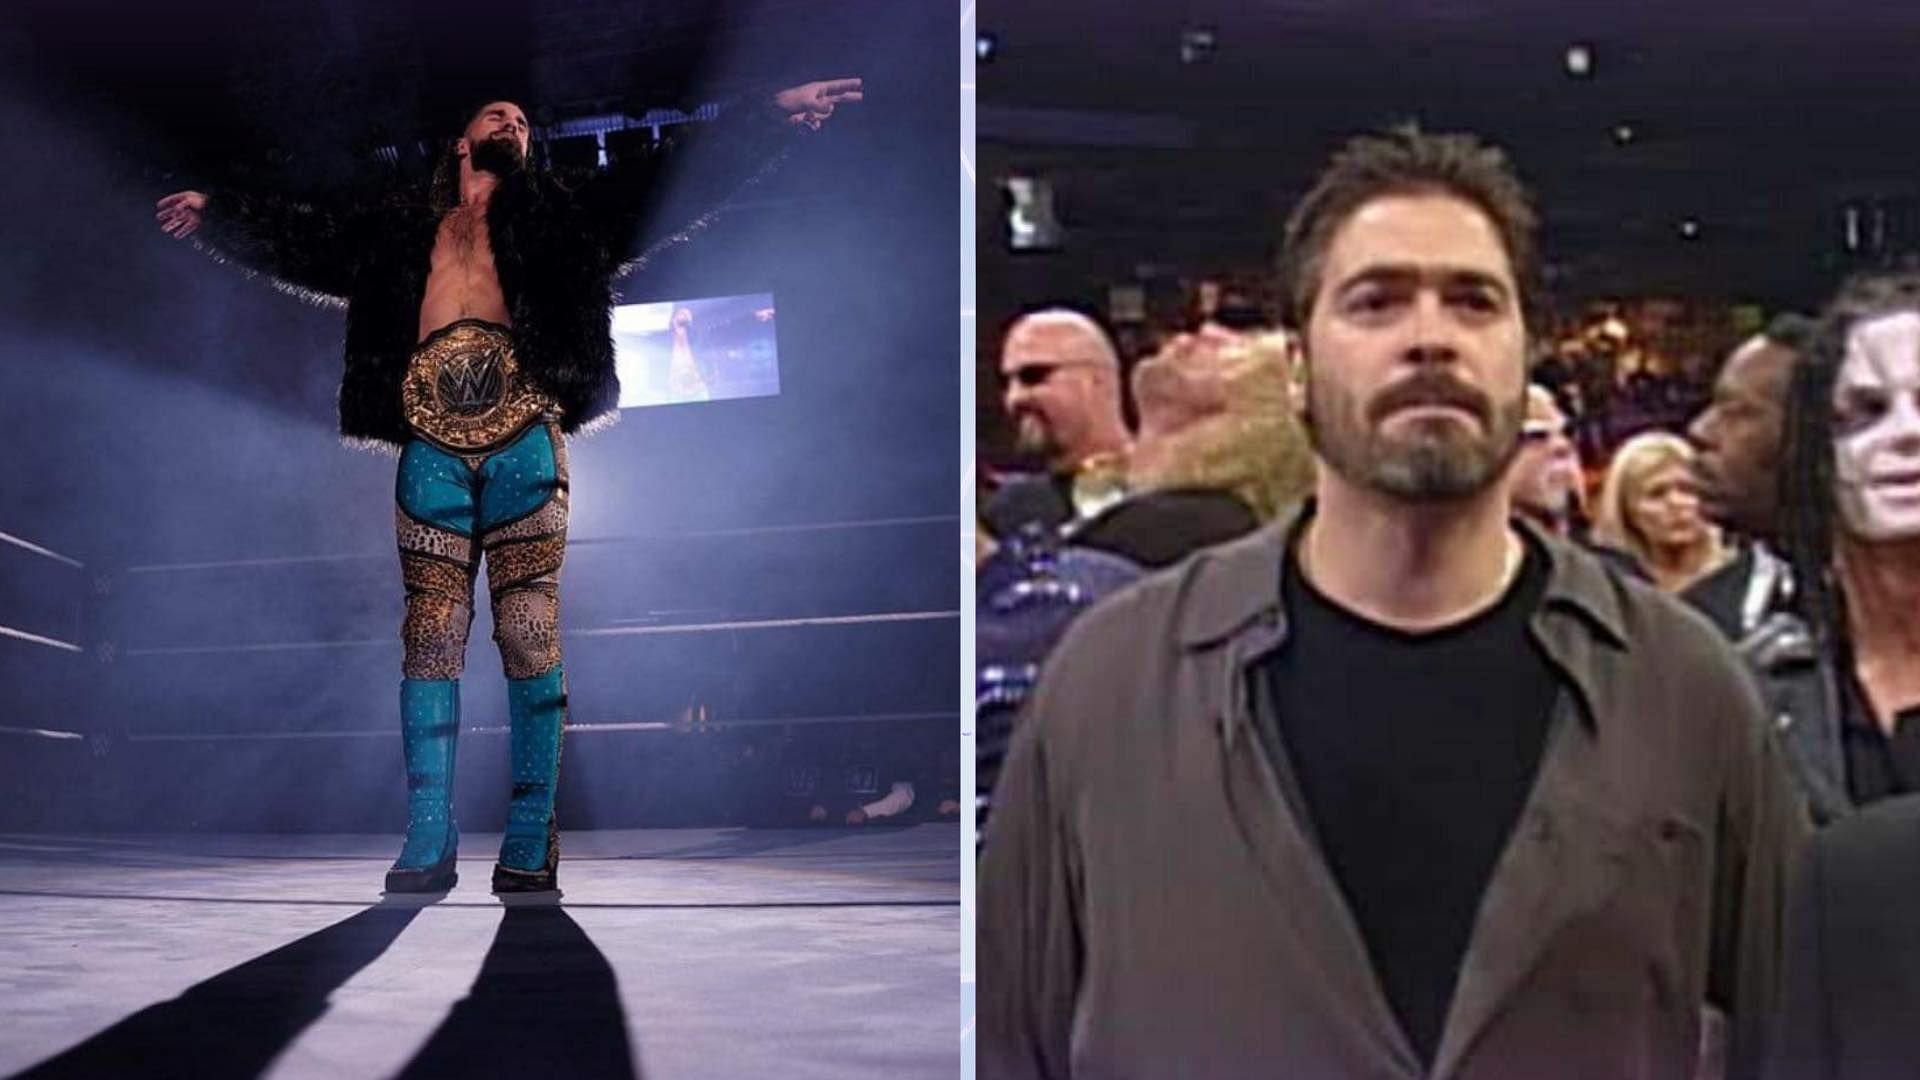 Seth Rollins lost his title at WrestleMania XL